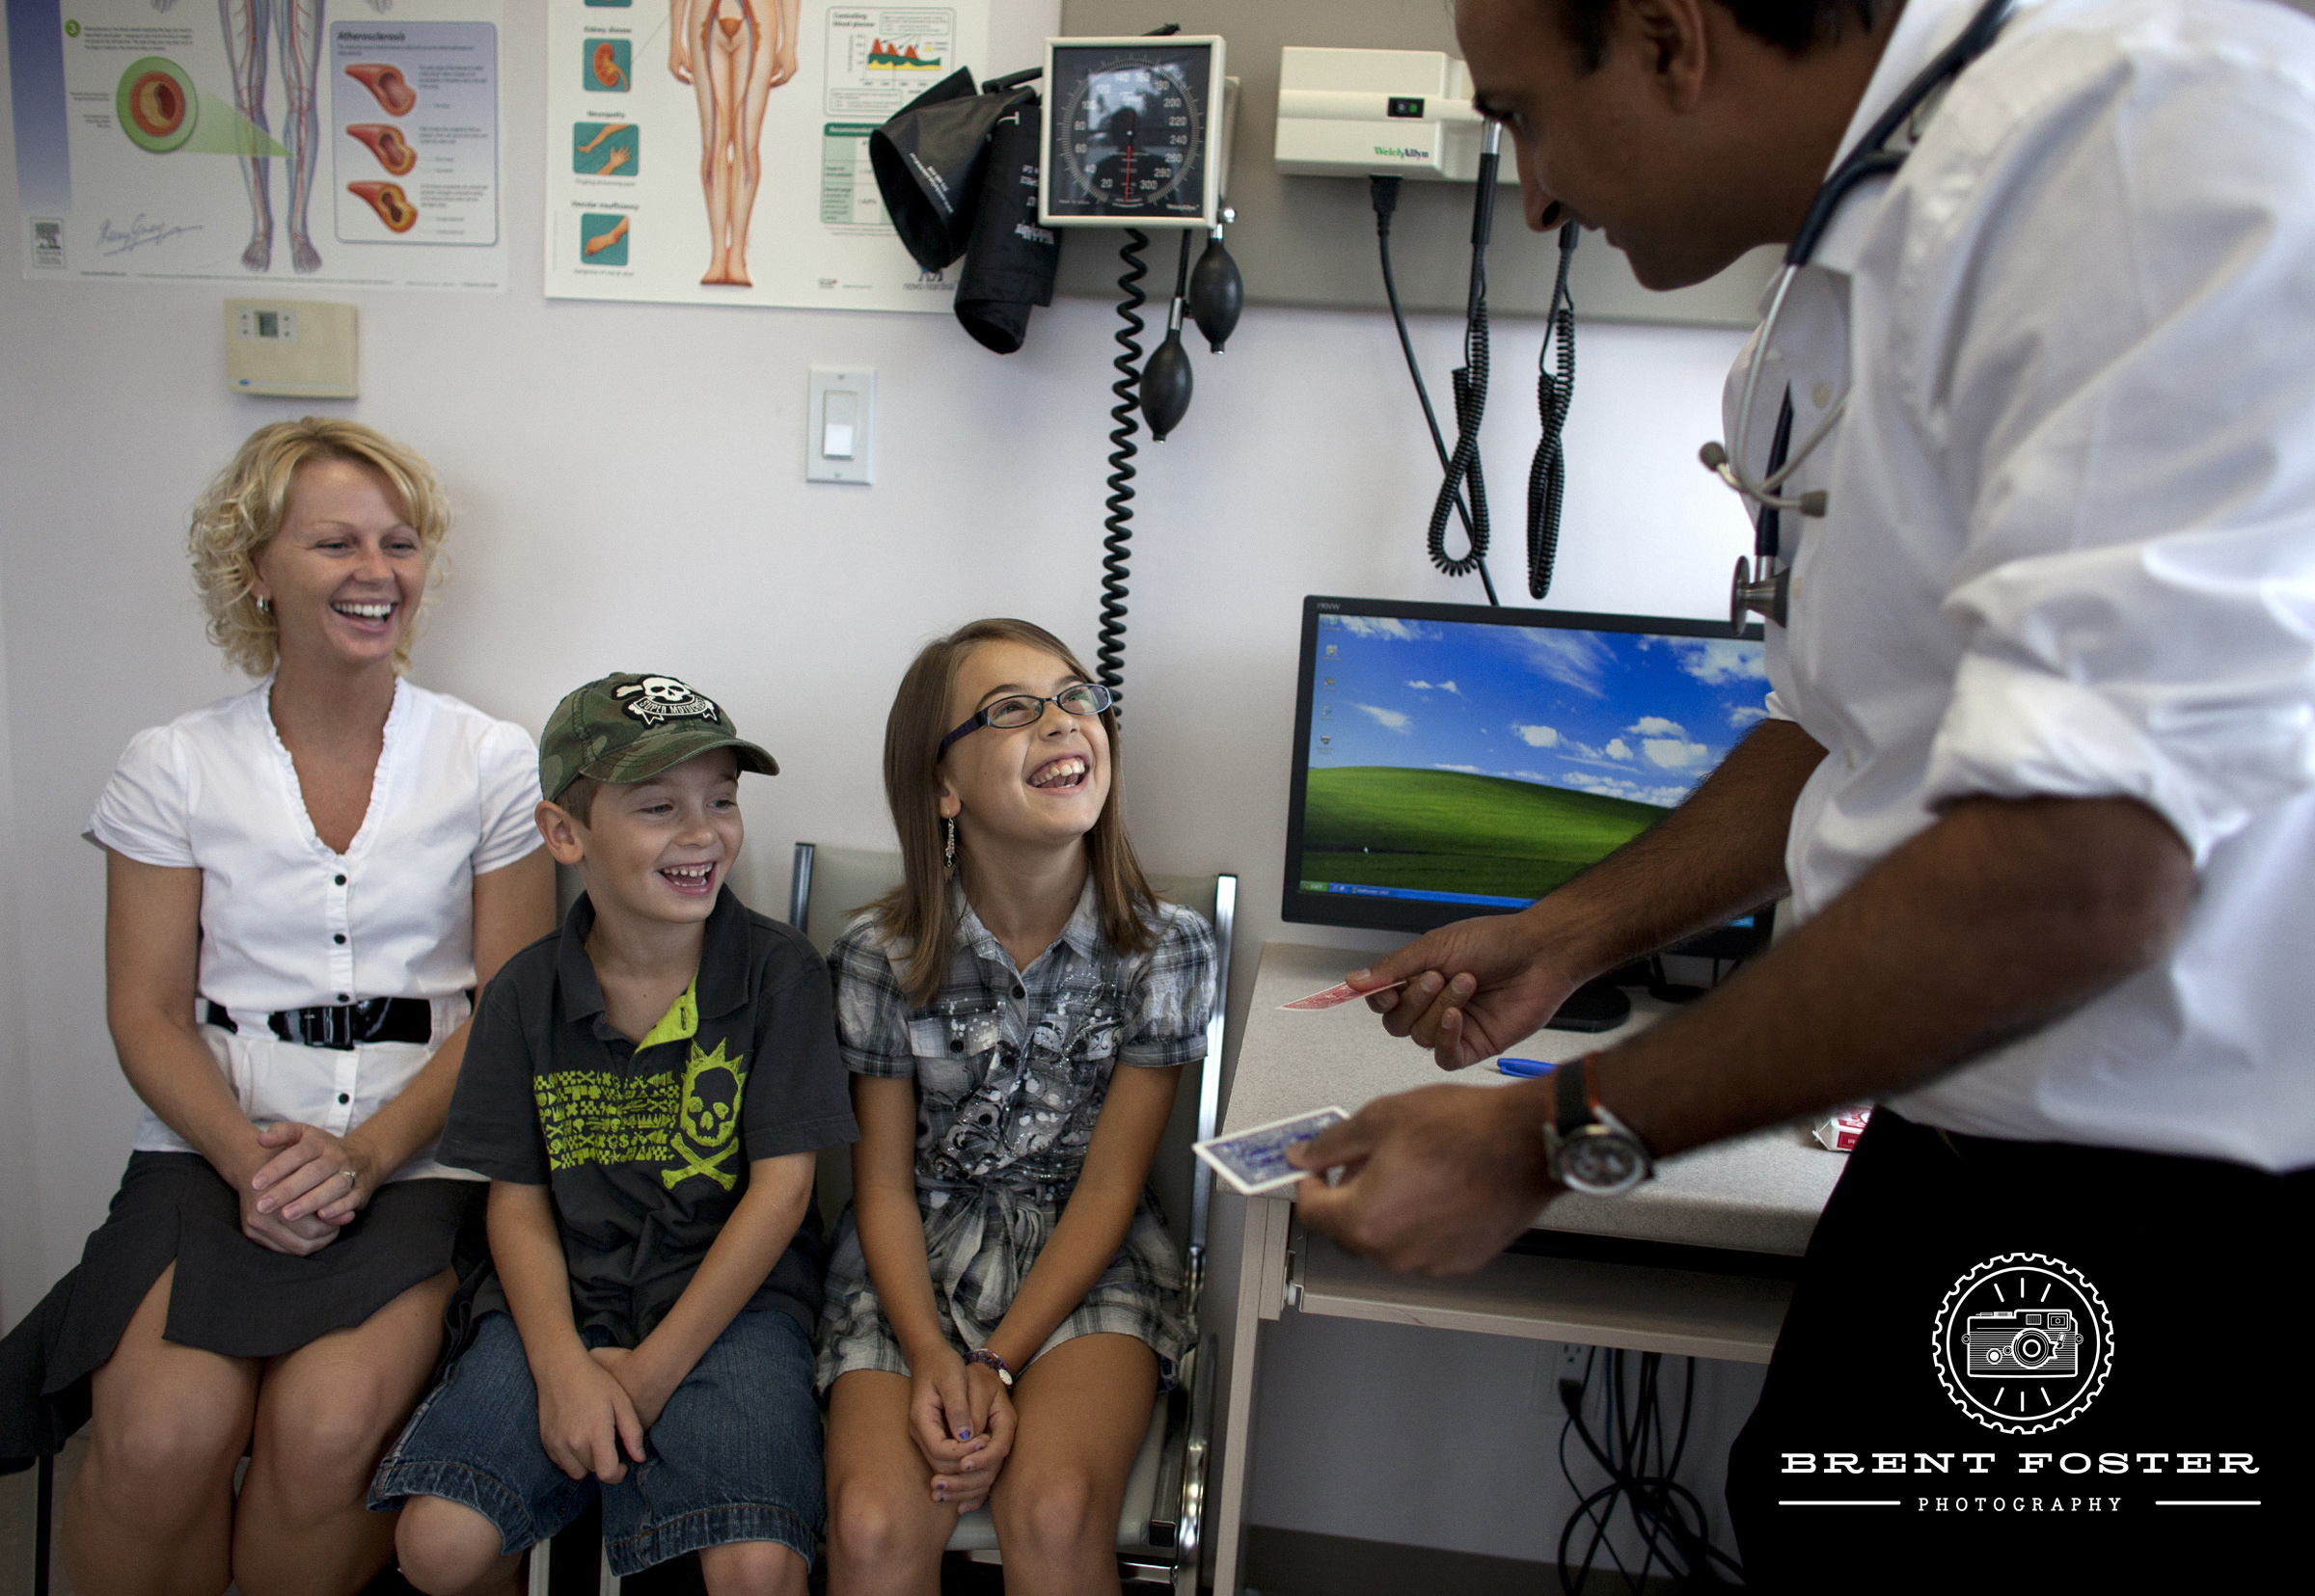 PHOTO: Dr. Lalit Chawla is pictured using magic as a tool to add laughter in the clinical setting.